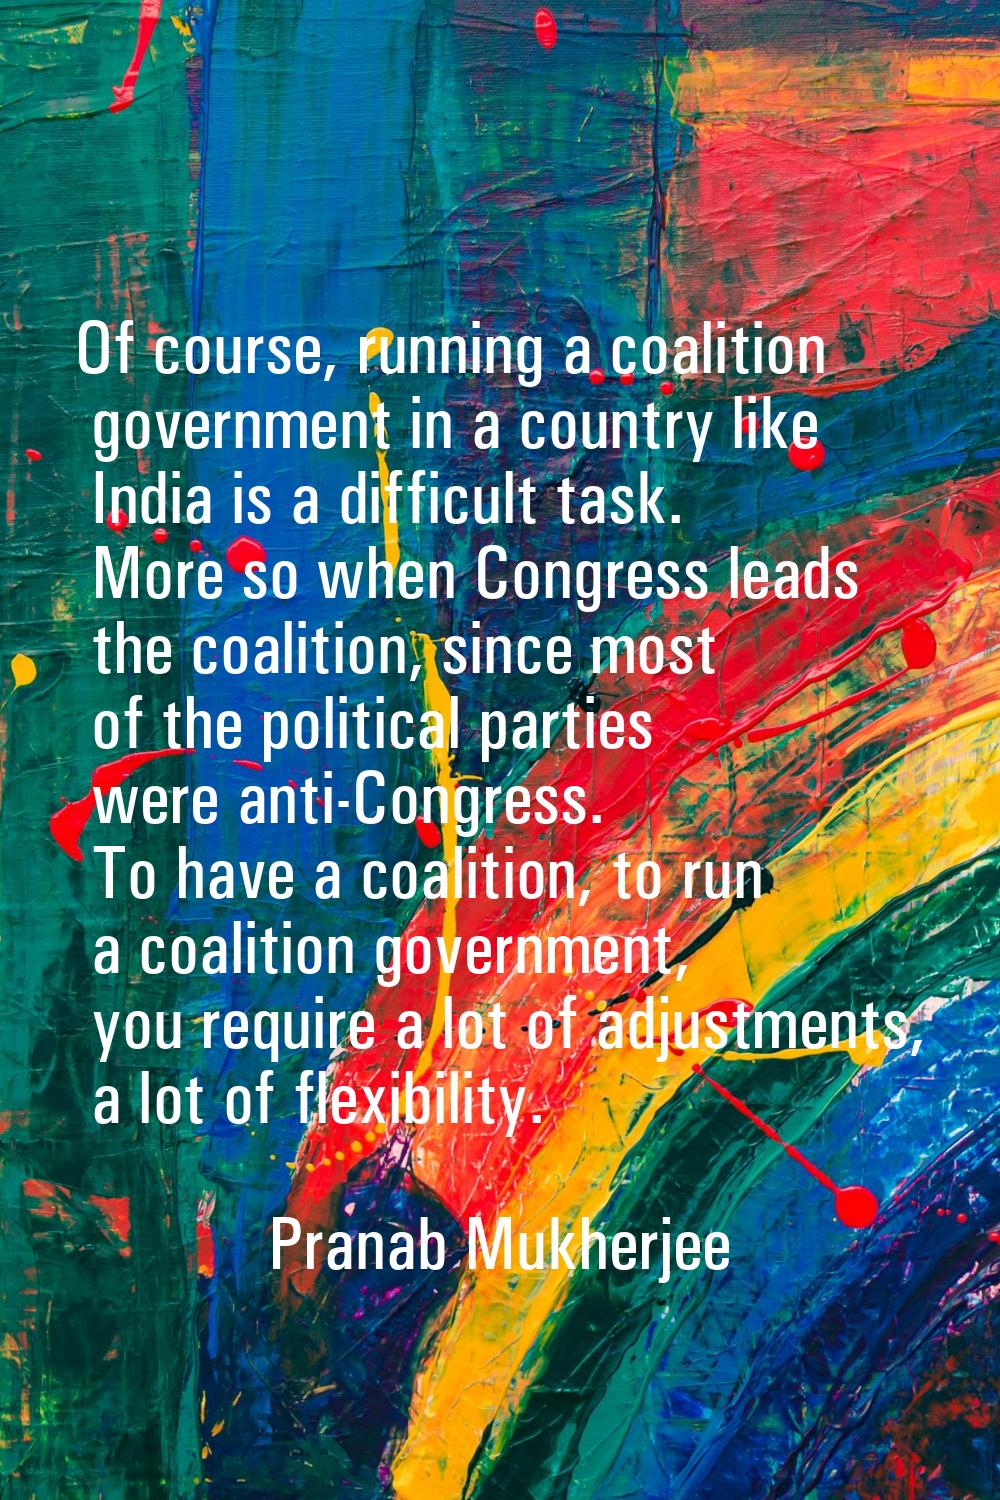 Of course, running a coalition government in a country like India is a difficult task. More so when